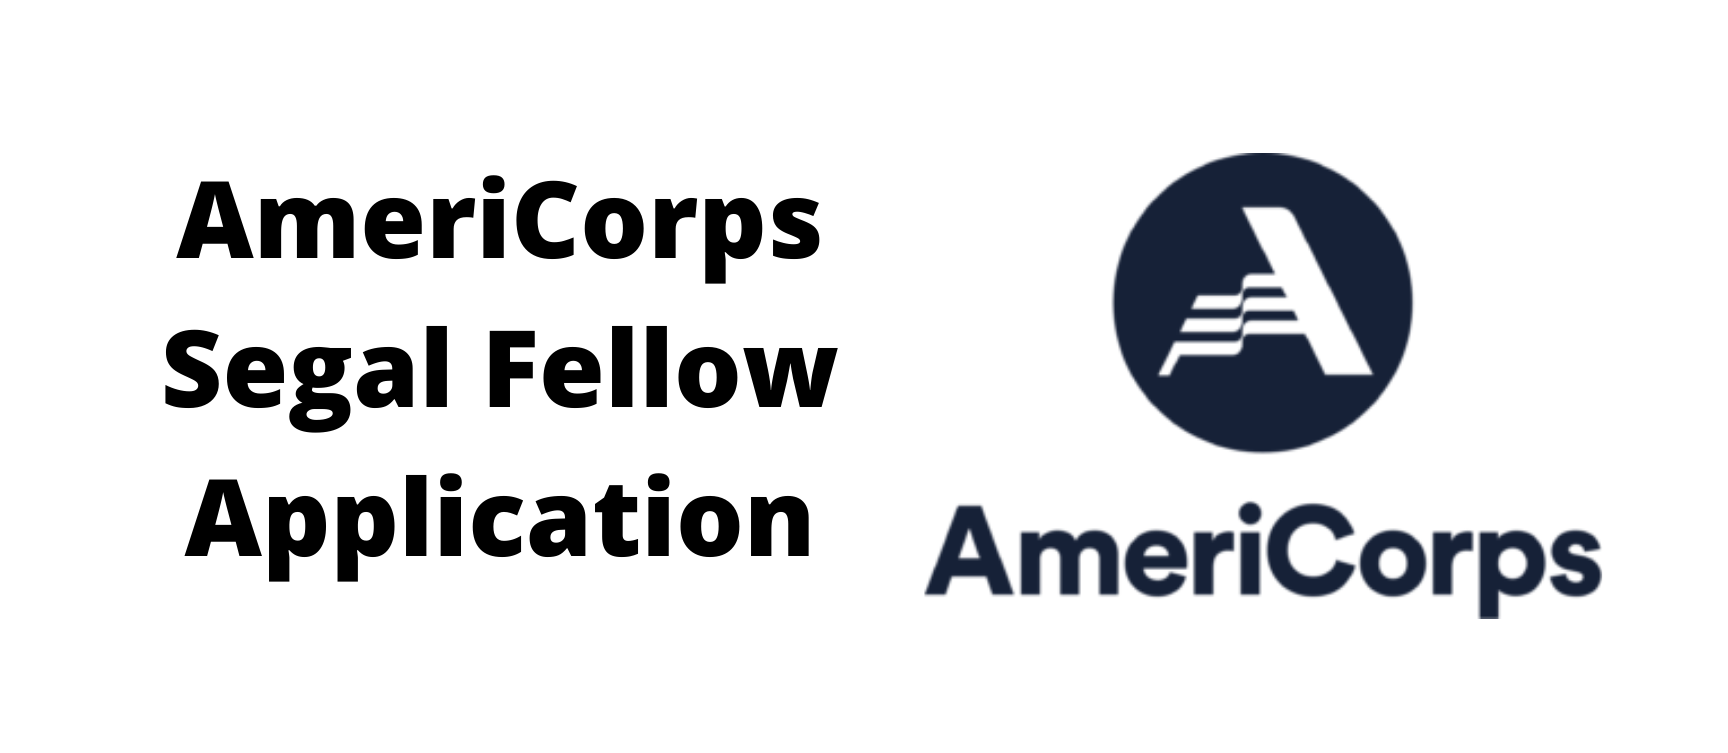 Heading for AmeriCorps Segal Fellow application with AmeriCorps logo